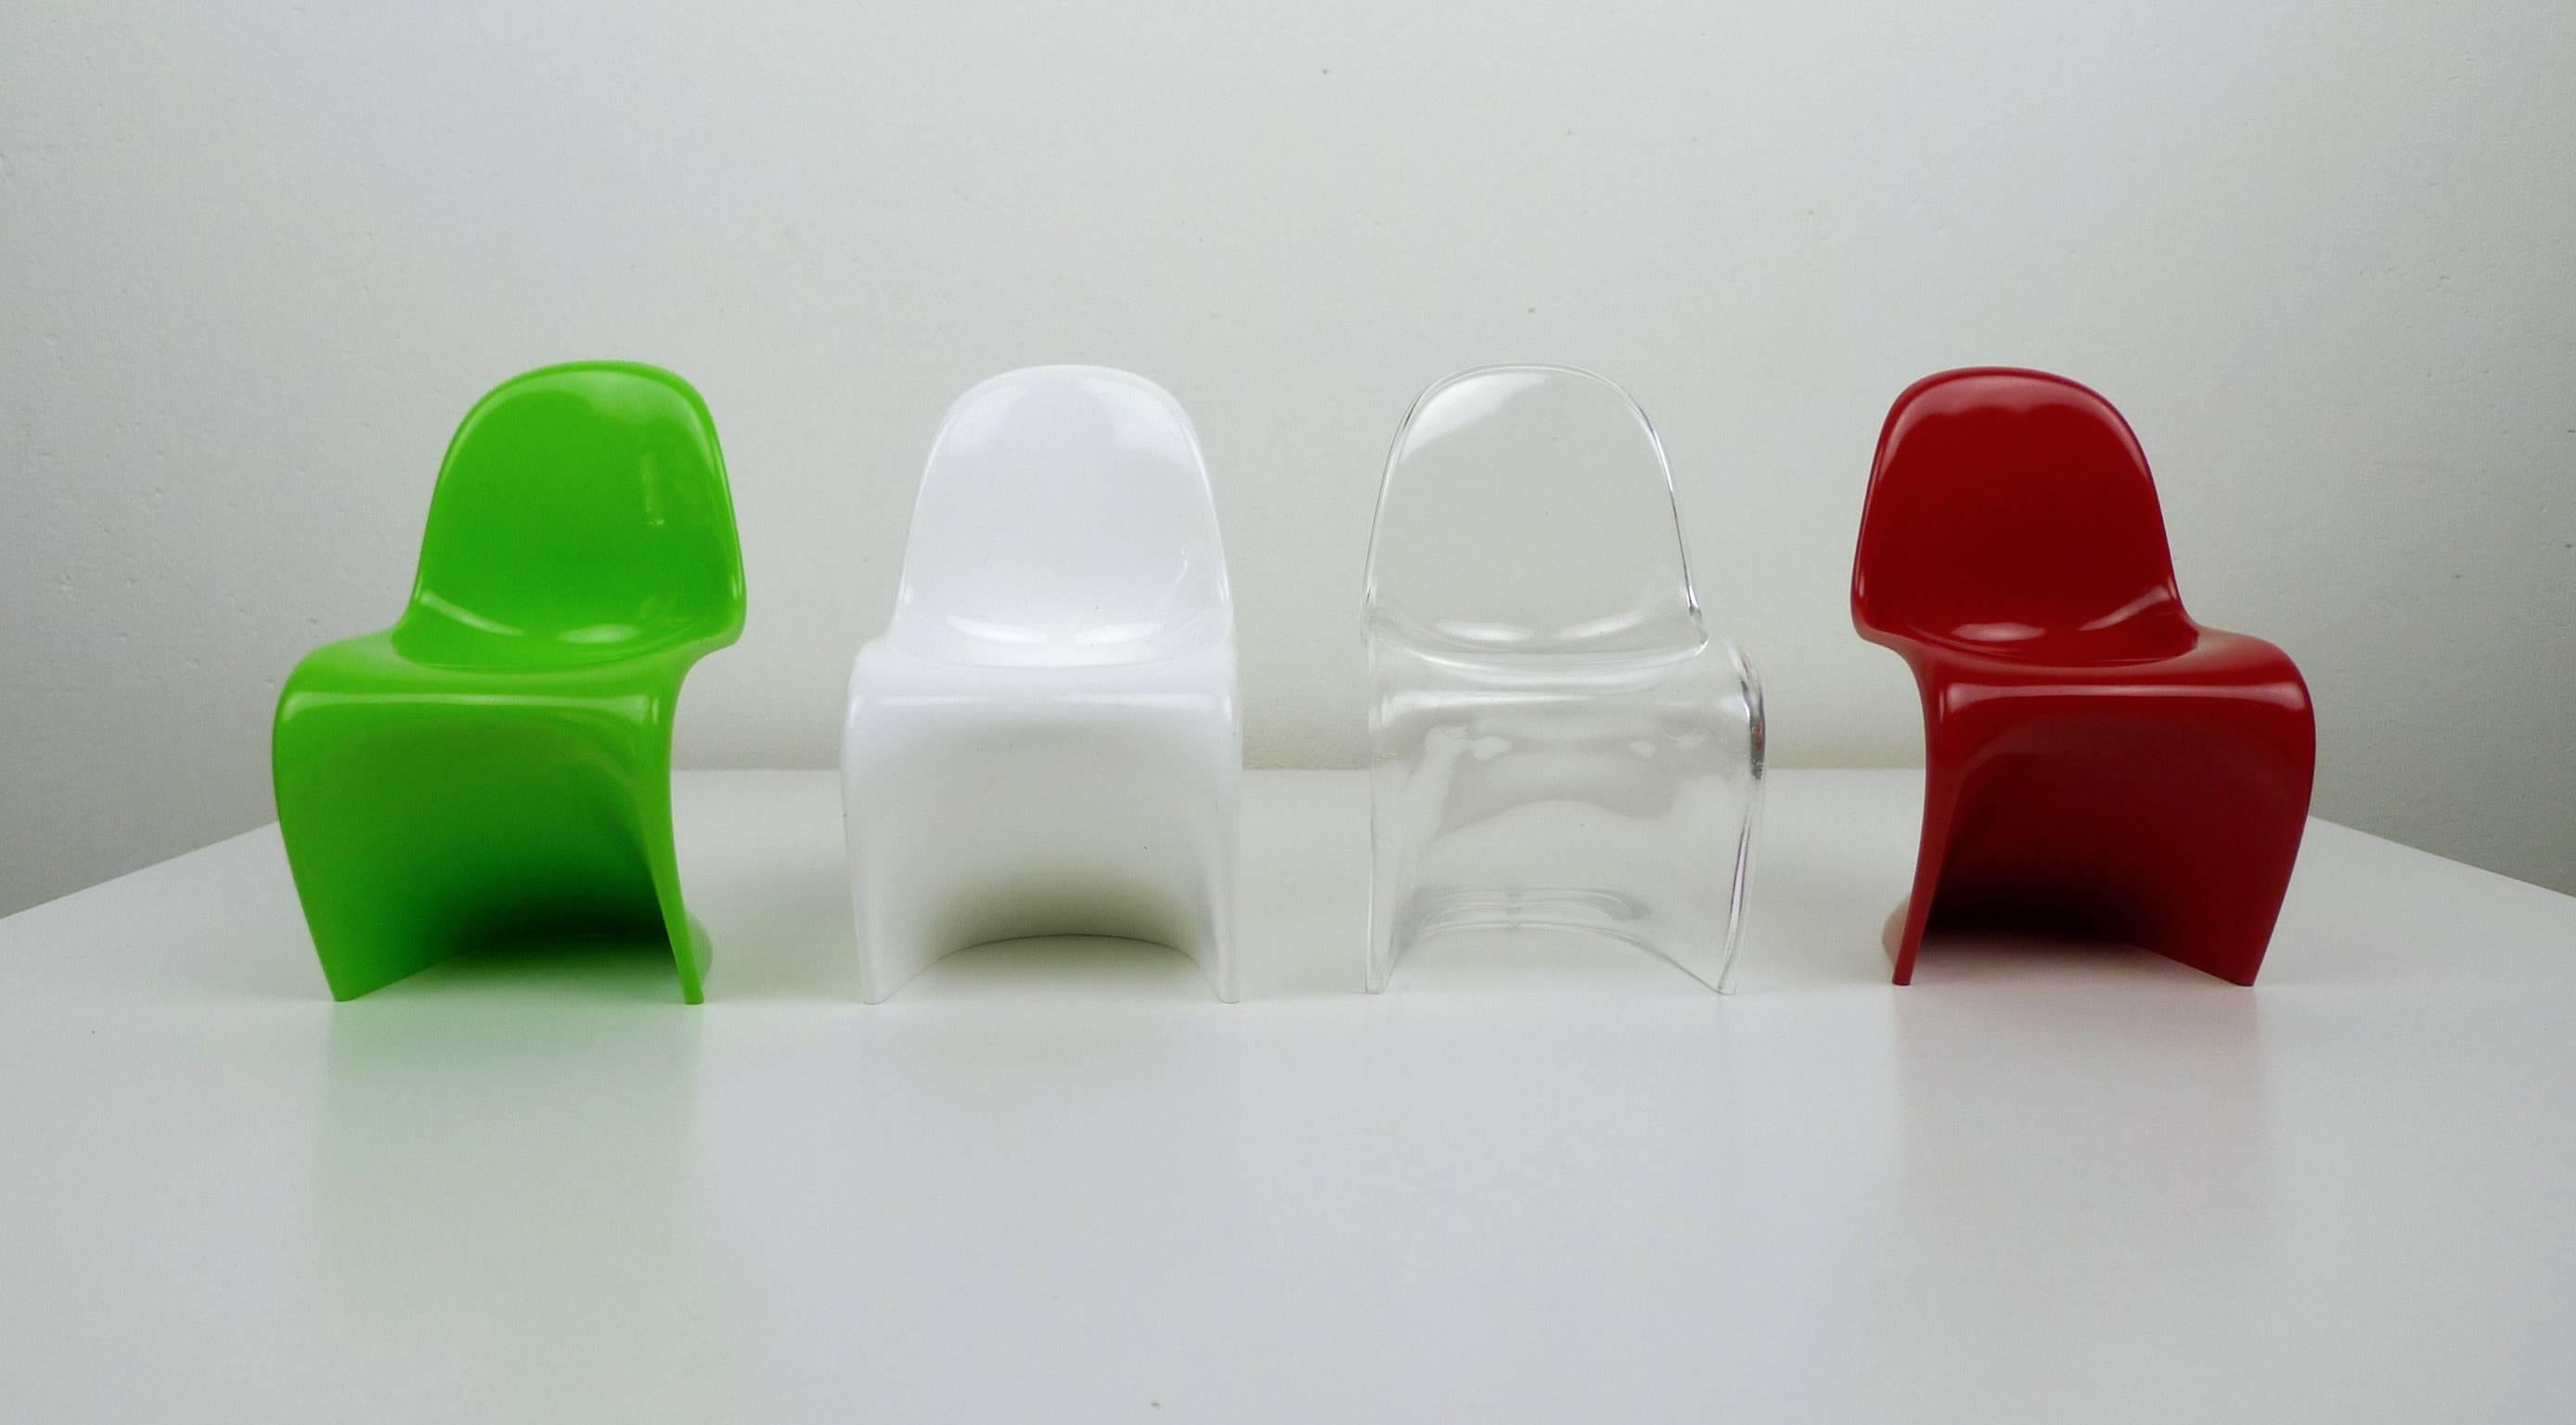 Space Age Set of Four Miniature Panton Chairs from Germany, 1970s For Sale